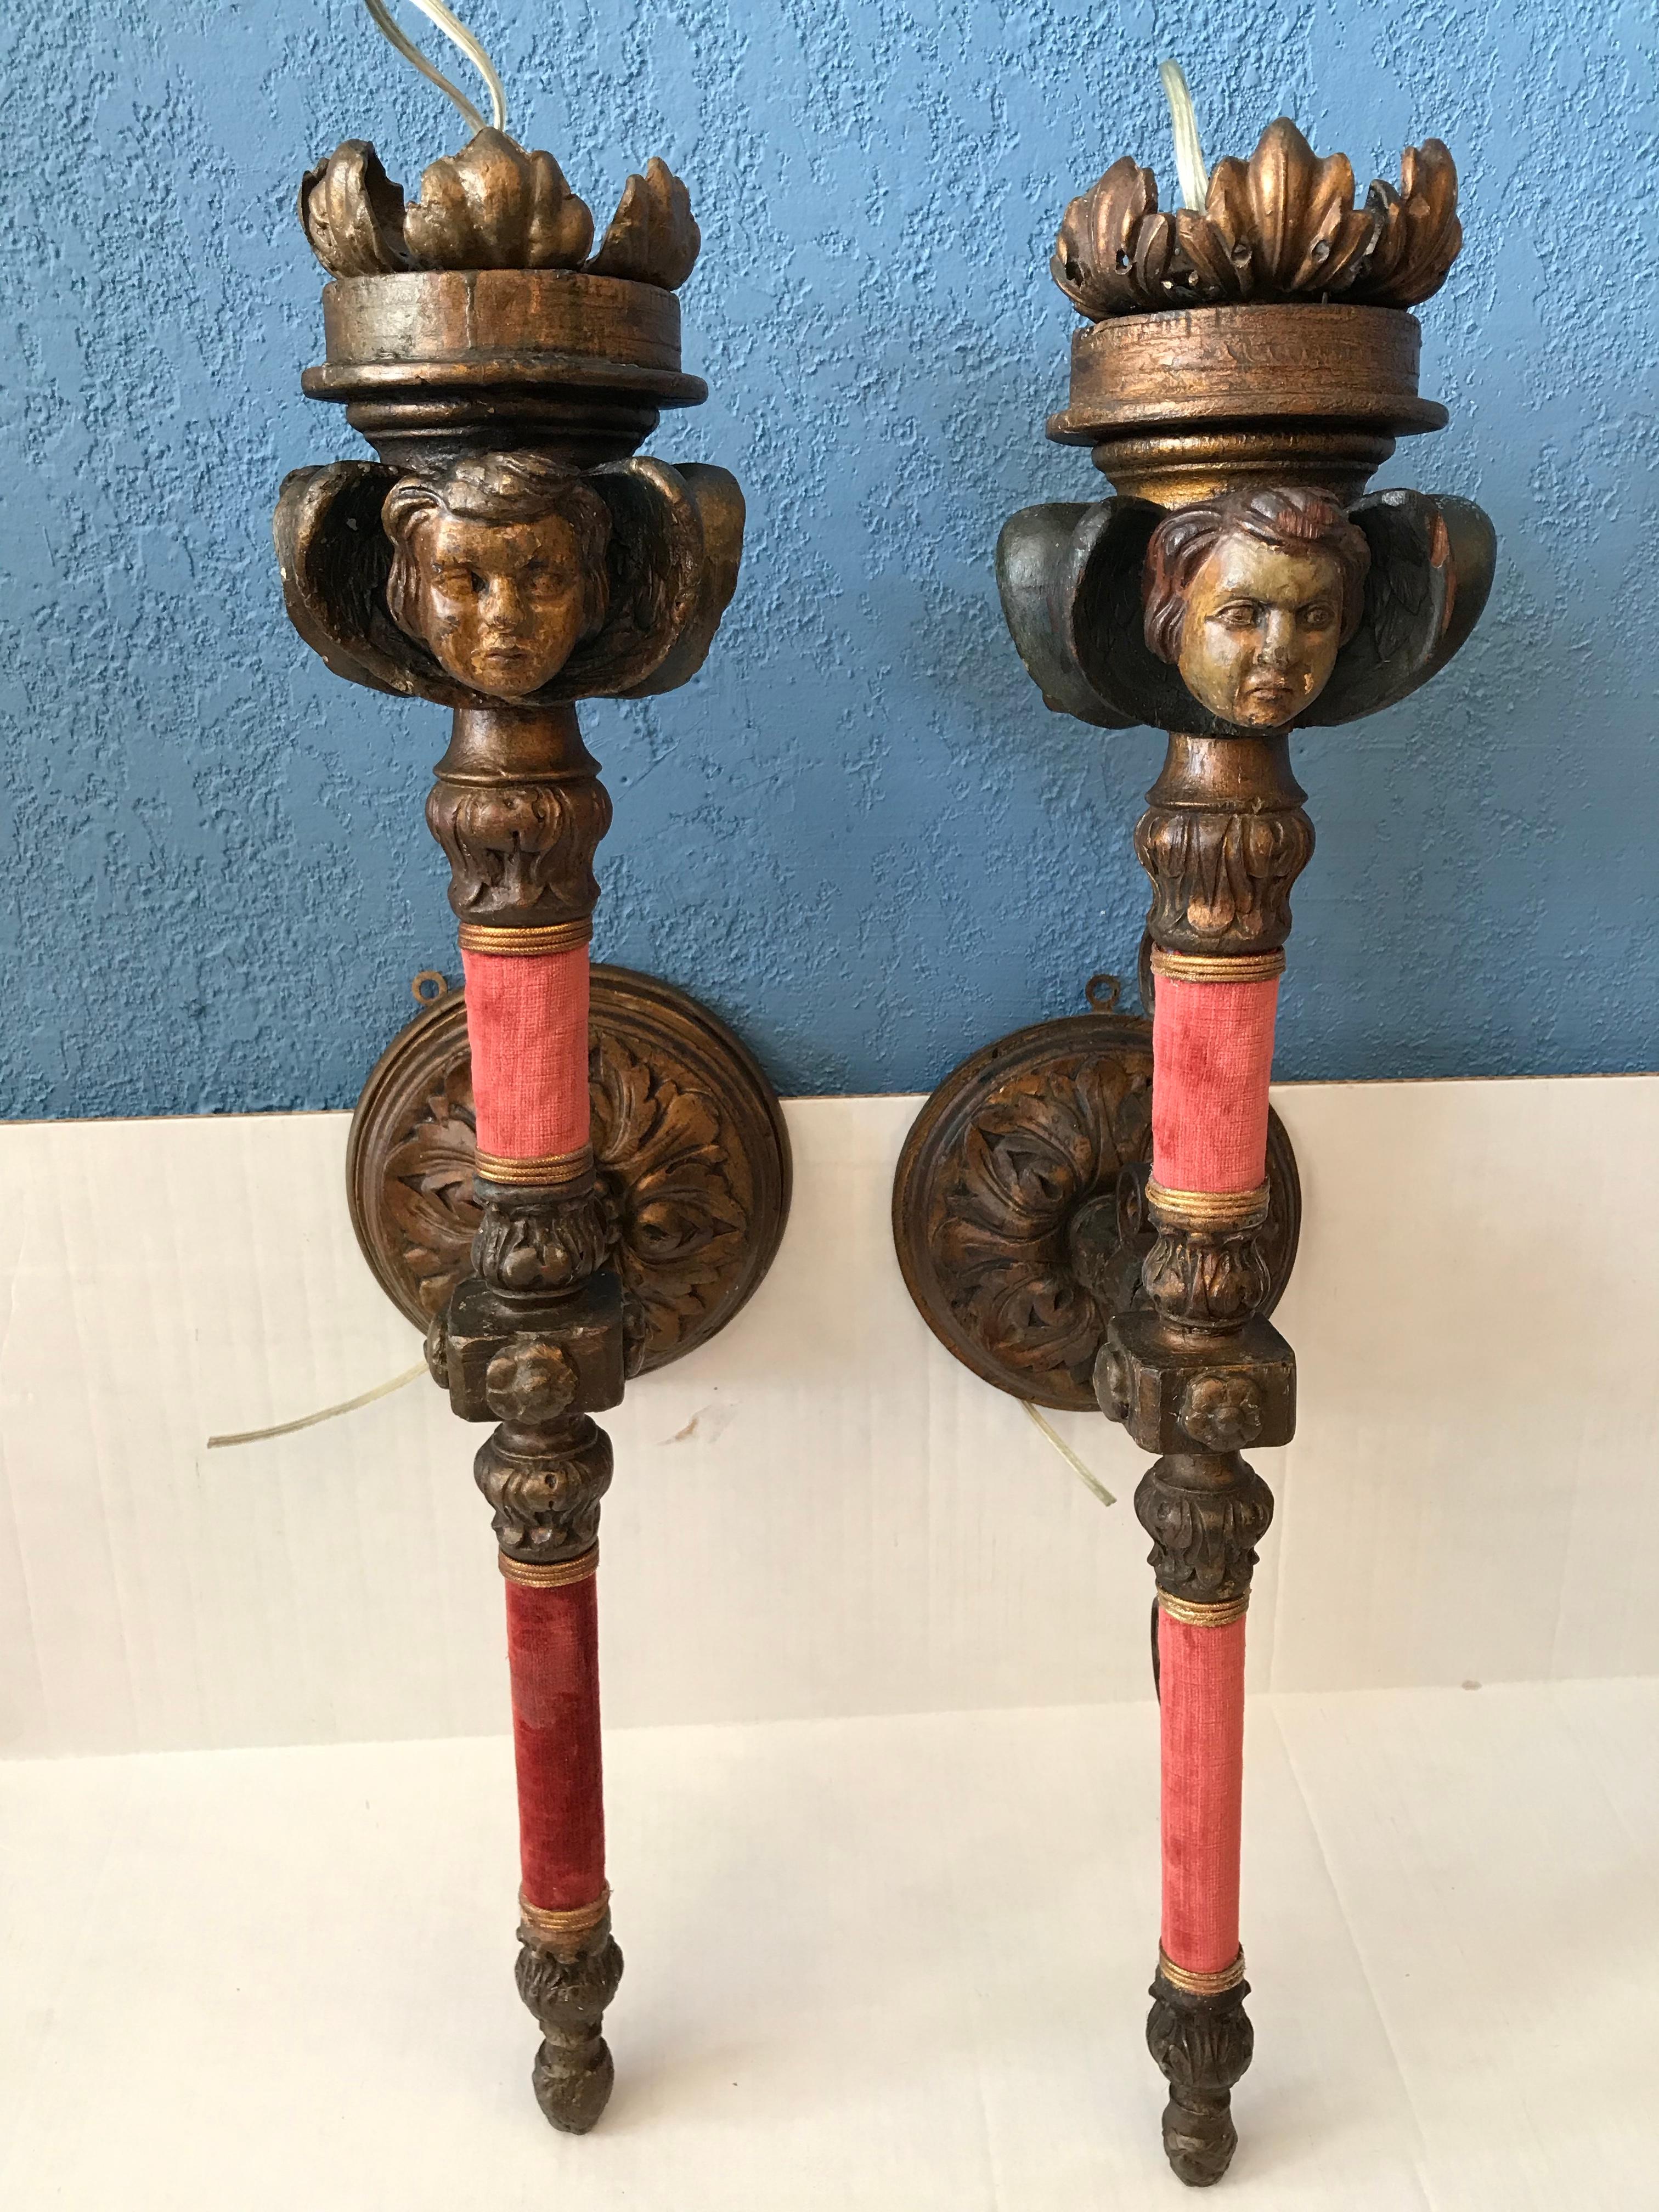 Each sconce is fashioned with 4 faces. All different personalities. The arms of the sconces are wrapped
in velvet, and the form of each like a 